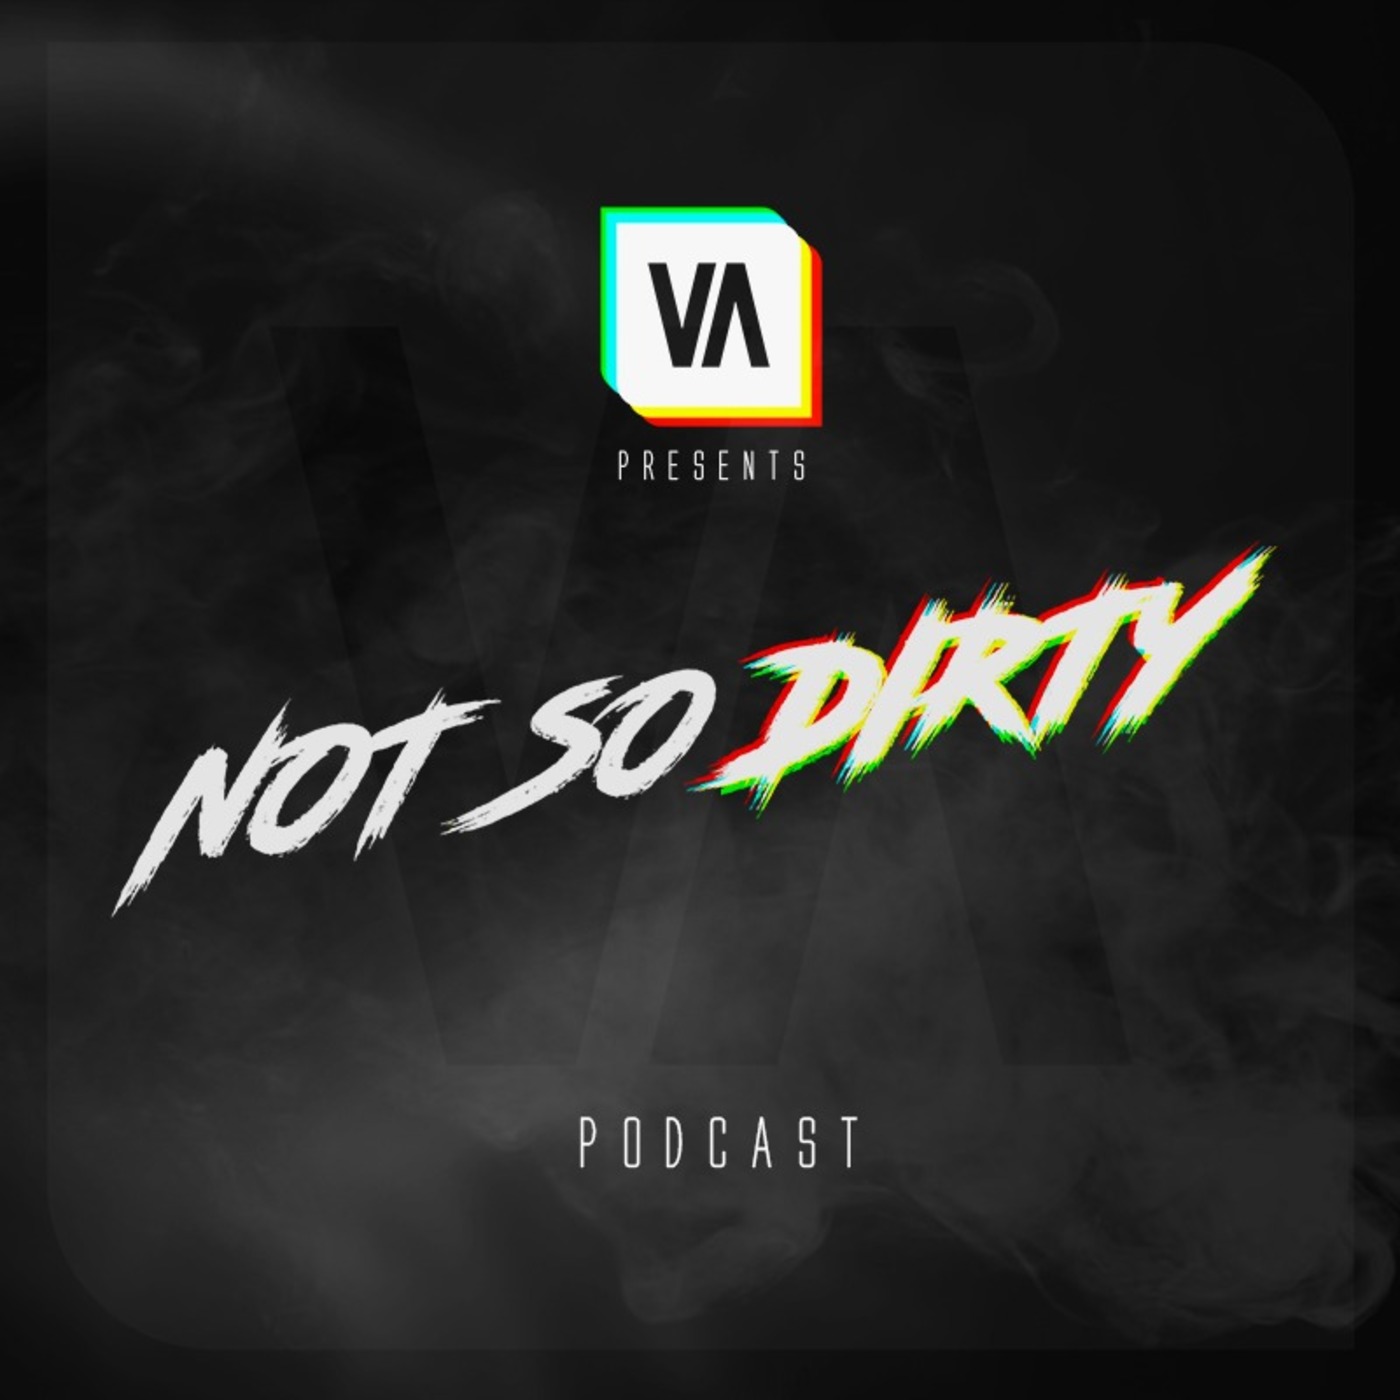 Episode 31: Not So Dirty Radioshow Ep 043 - October 2021